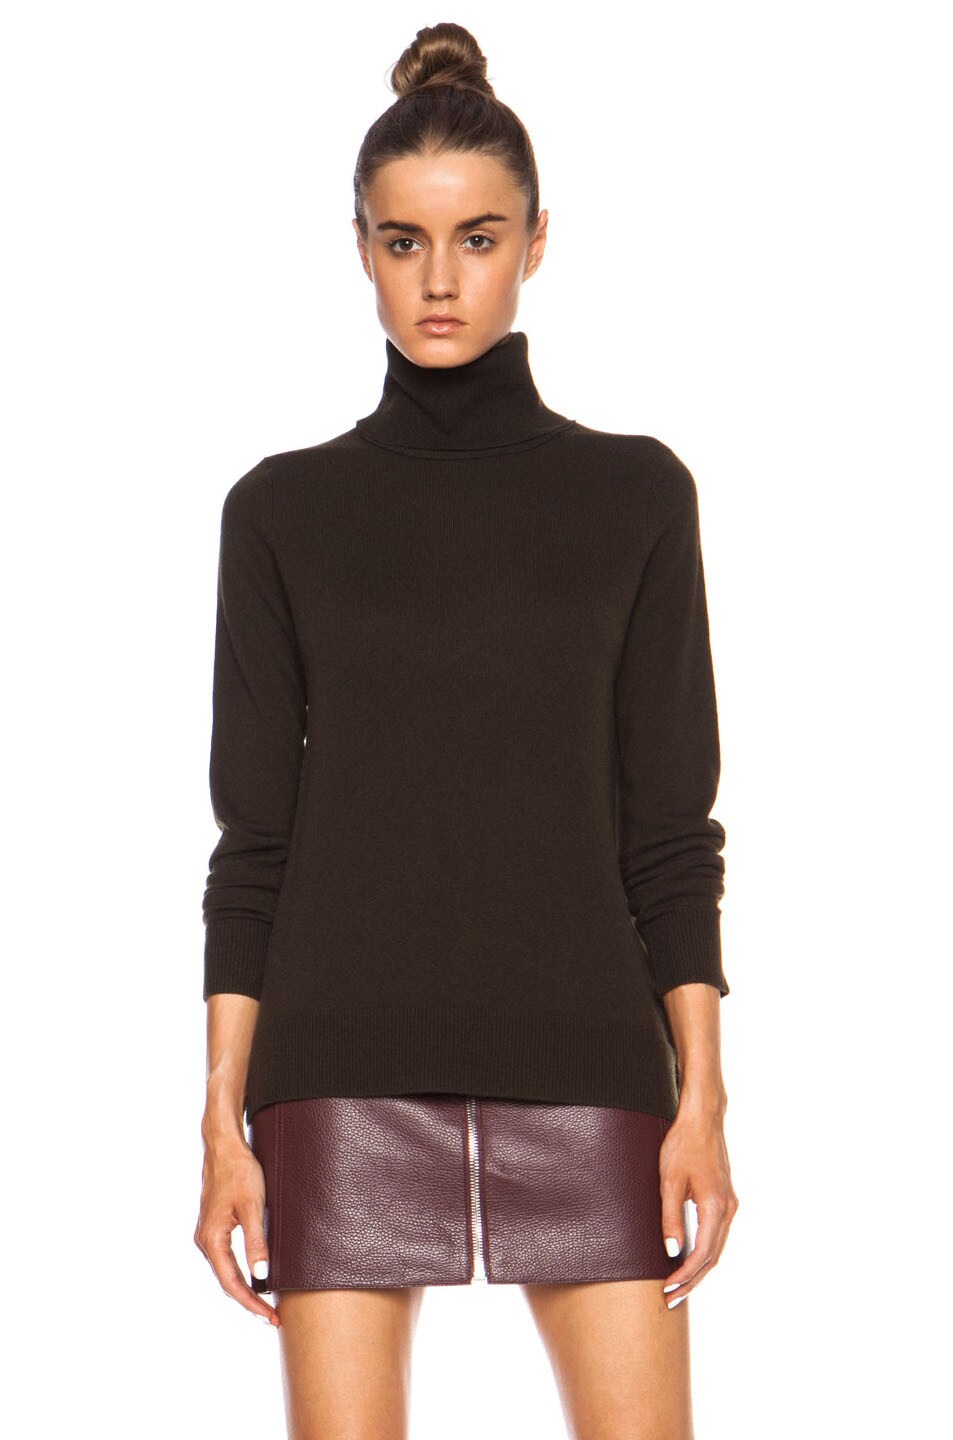 Vince Overlay Cashmere Turtleneck in Foliage | FWRD